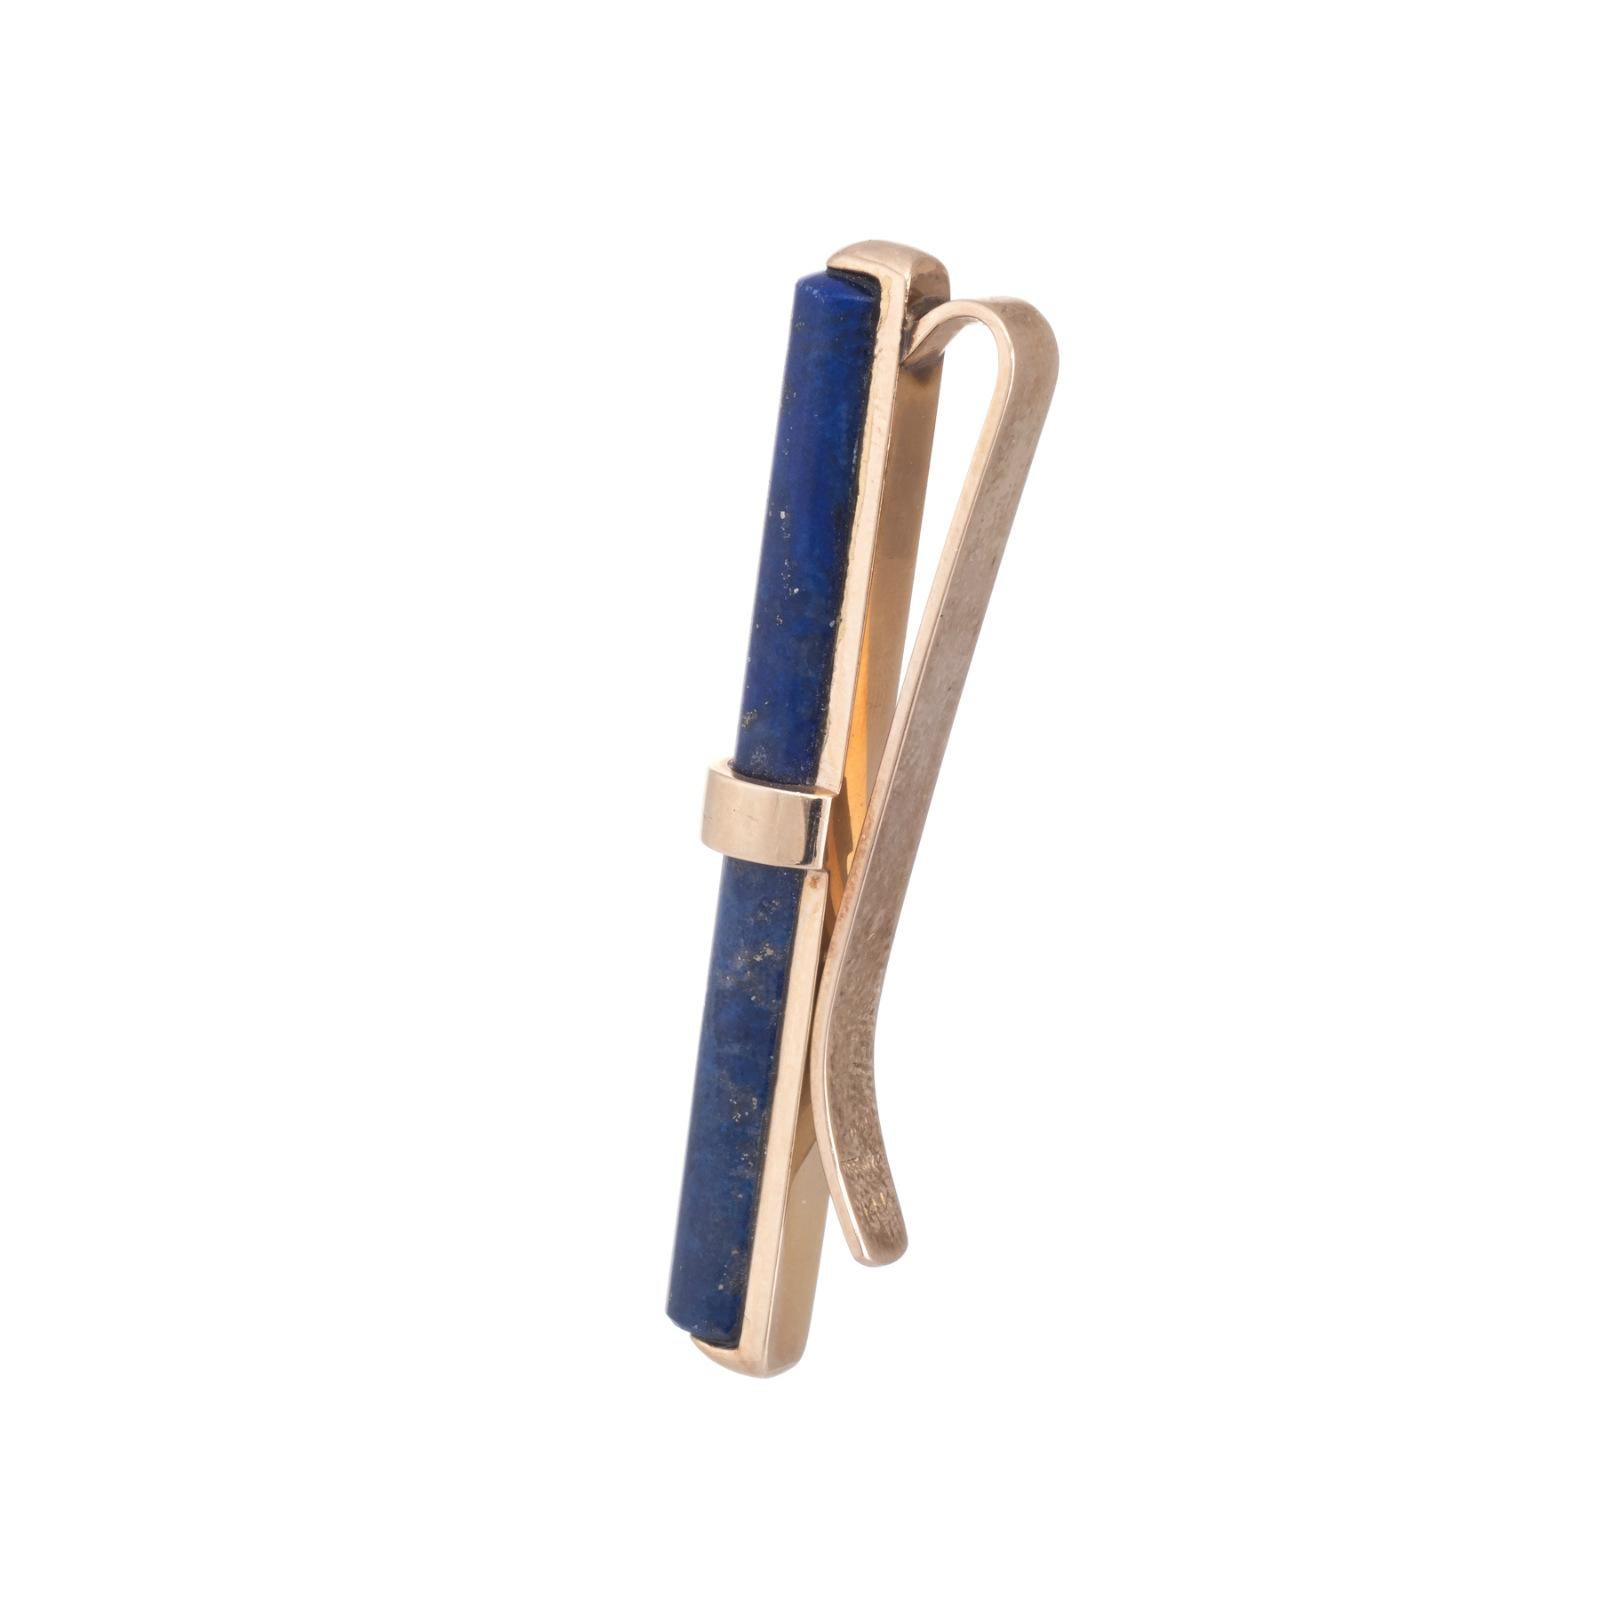 Elegant Tiffany & Co tie clasp (or money clip), crafted in 14k yellow gold. 

Lapis Lazuli measures 20mm x 5mm (two separate sections). The lapis is in excellent condition and free of cracks or chips.  

A versatile piece that can be worn as a tie